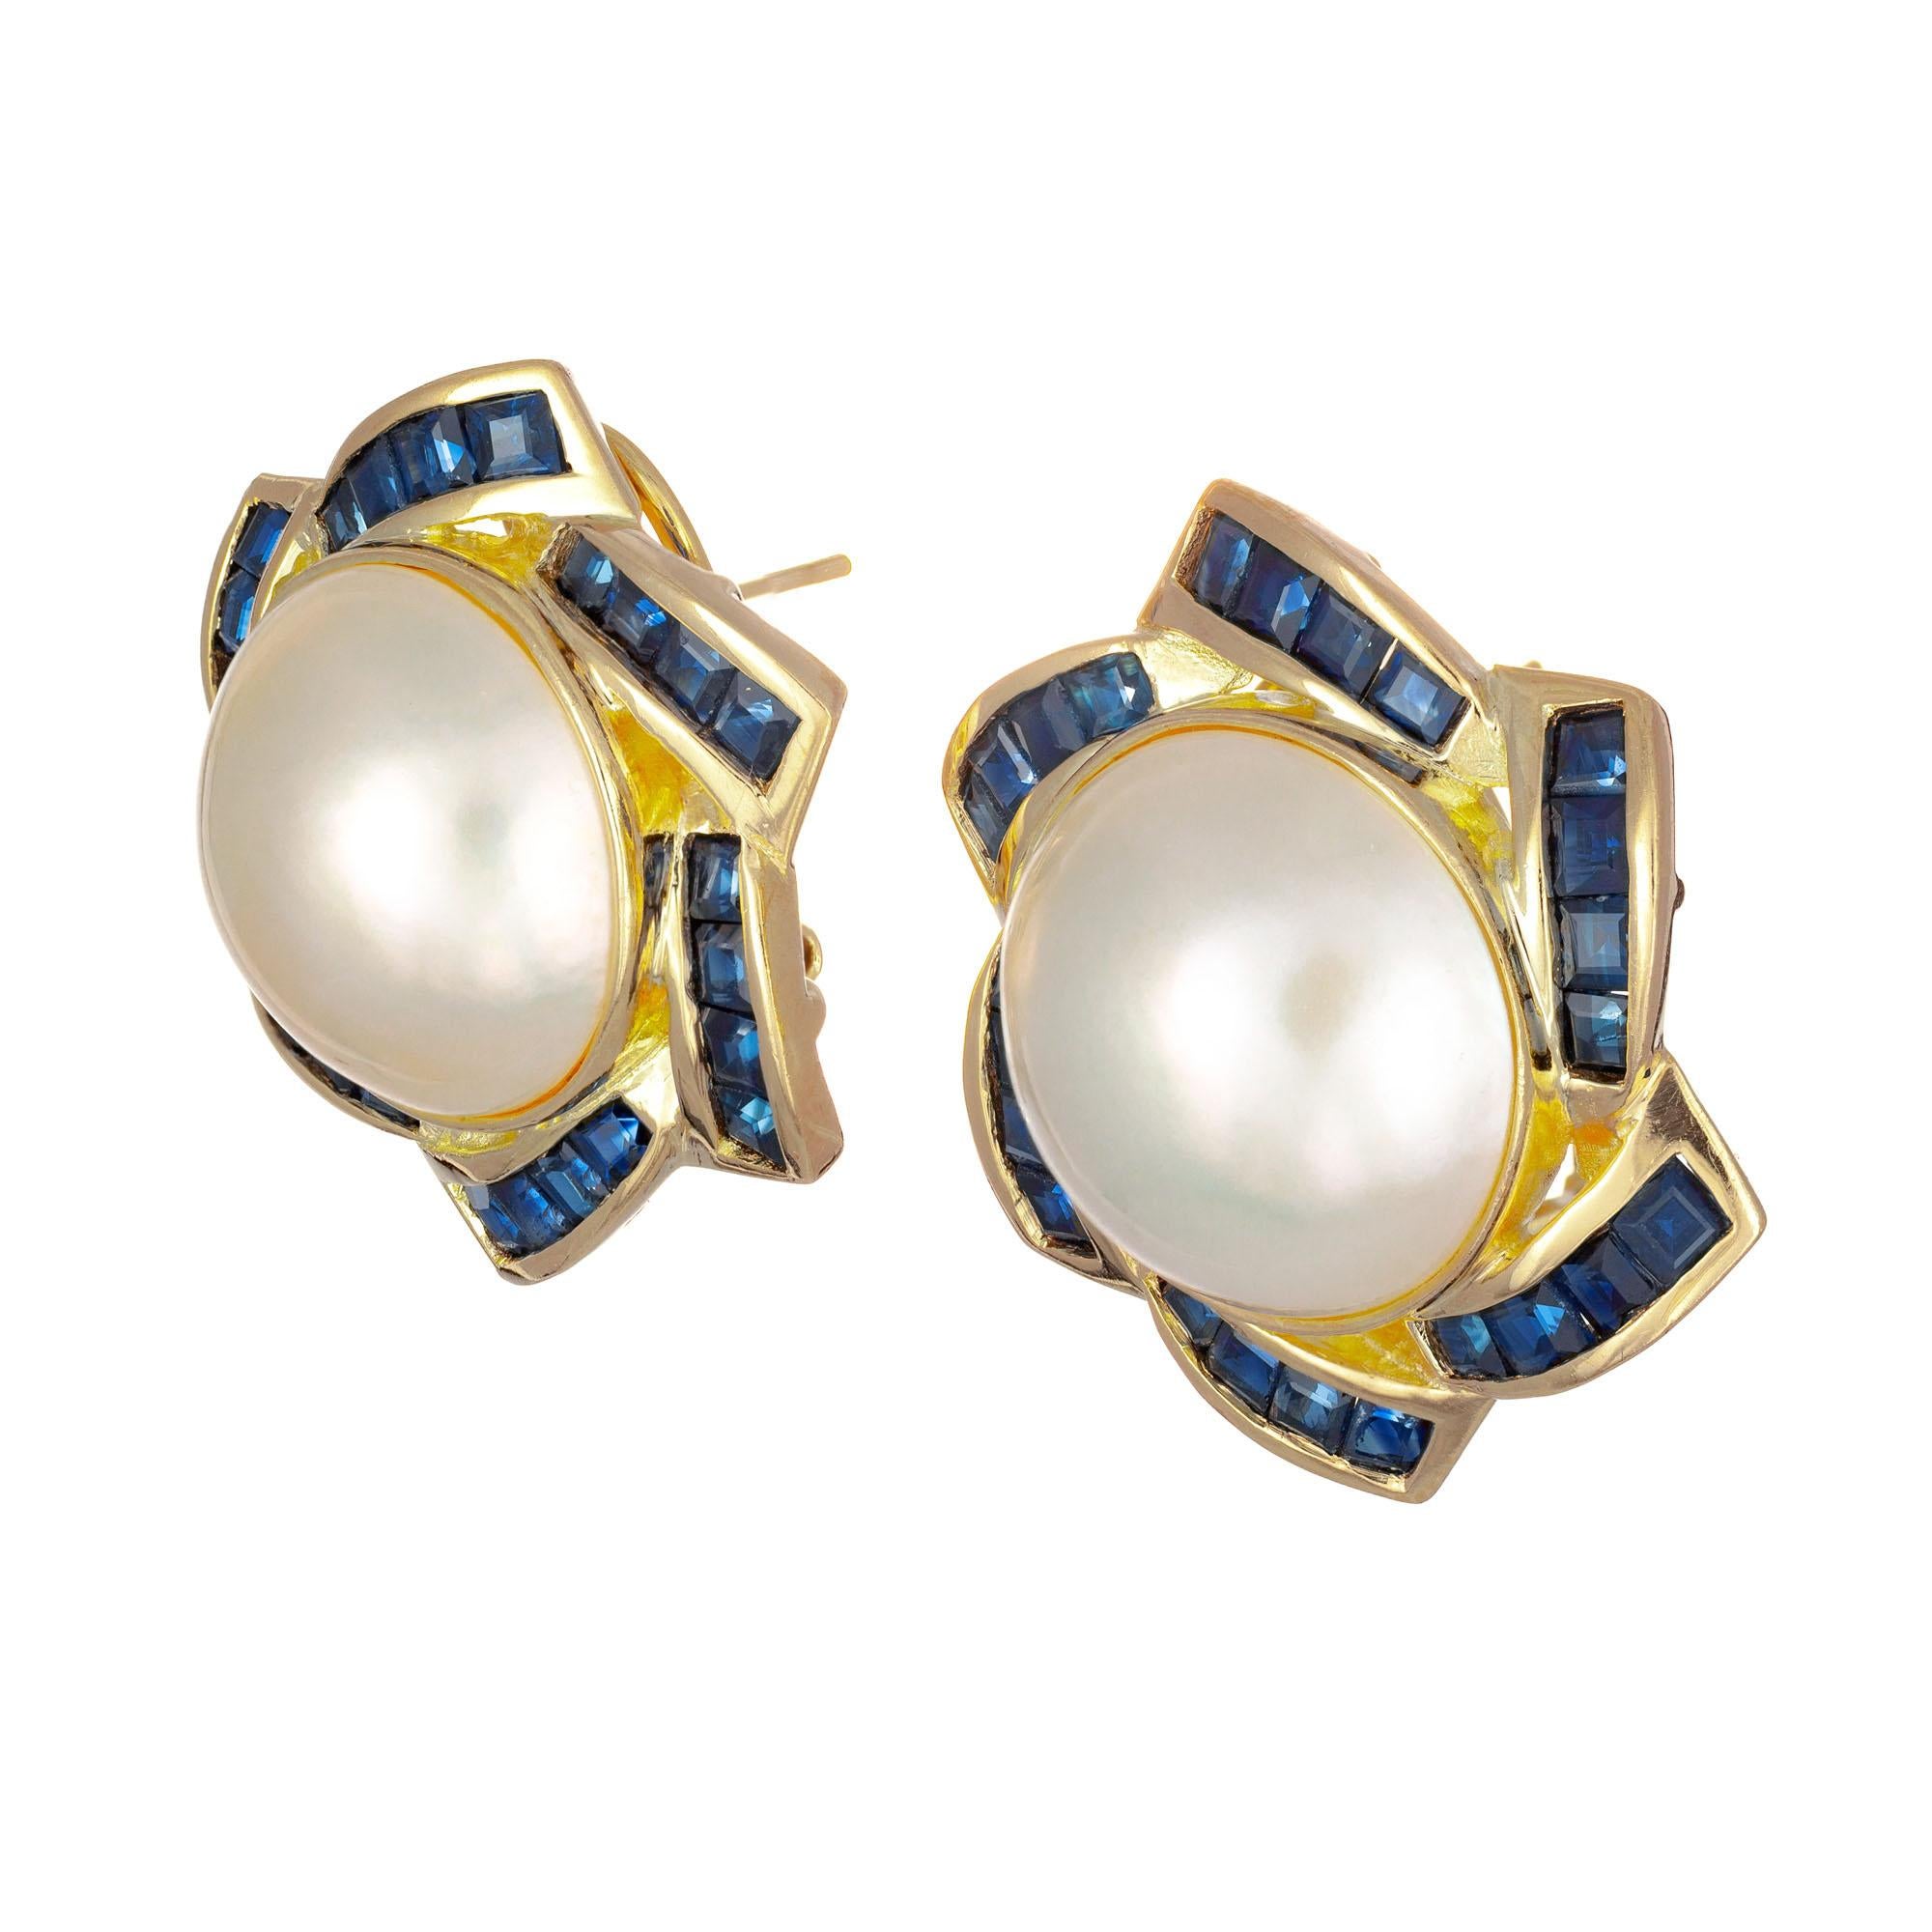 14mm Mabe pearl and sapphire clip post 14k yellow gold earrings. Circa 1990

2 Crème mabe pearls 14mm
48 square cut dark blue sapphires, approx. 2.00cts
14k yellow gold 
Stamped: 14k 585
12.8 grams
Top to bottom: 25mm or 1 Inch
Width: 24.7mm or